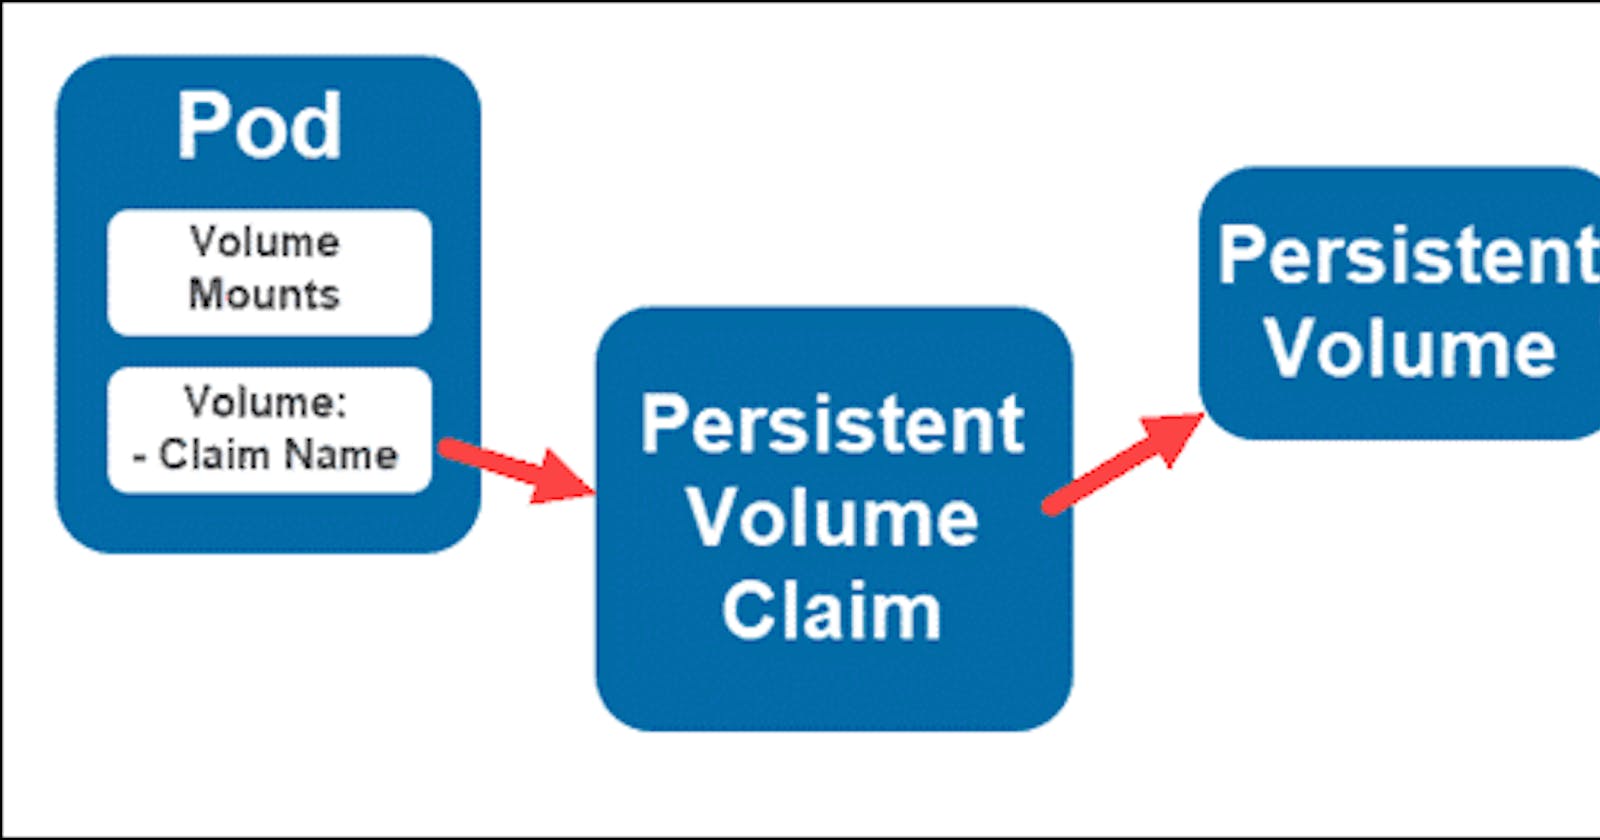 Day 36 - Persistent Volumes